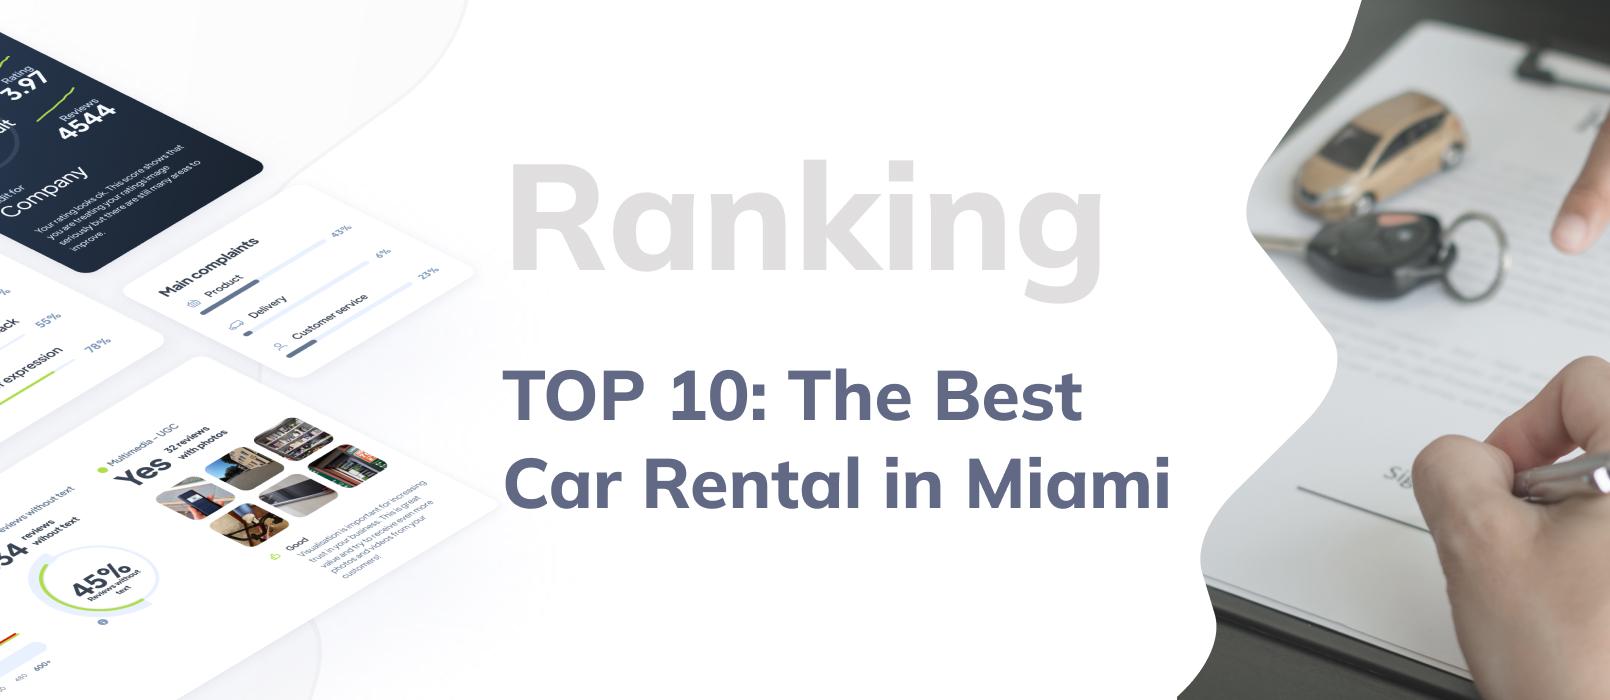 The Best Car Rentals in Miami - Customers Reviews Based Ranking.